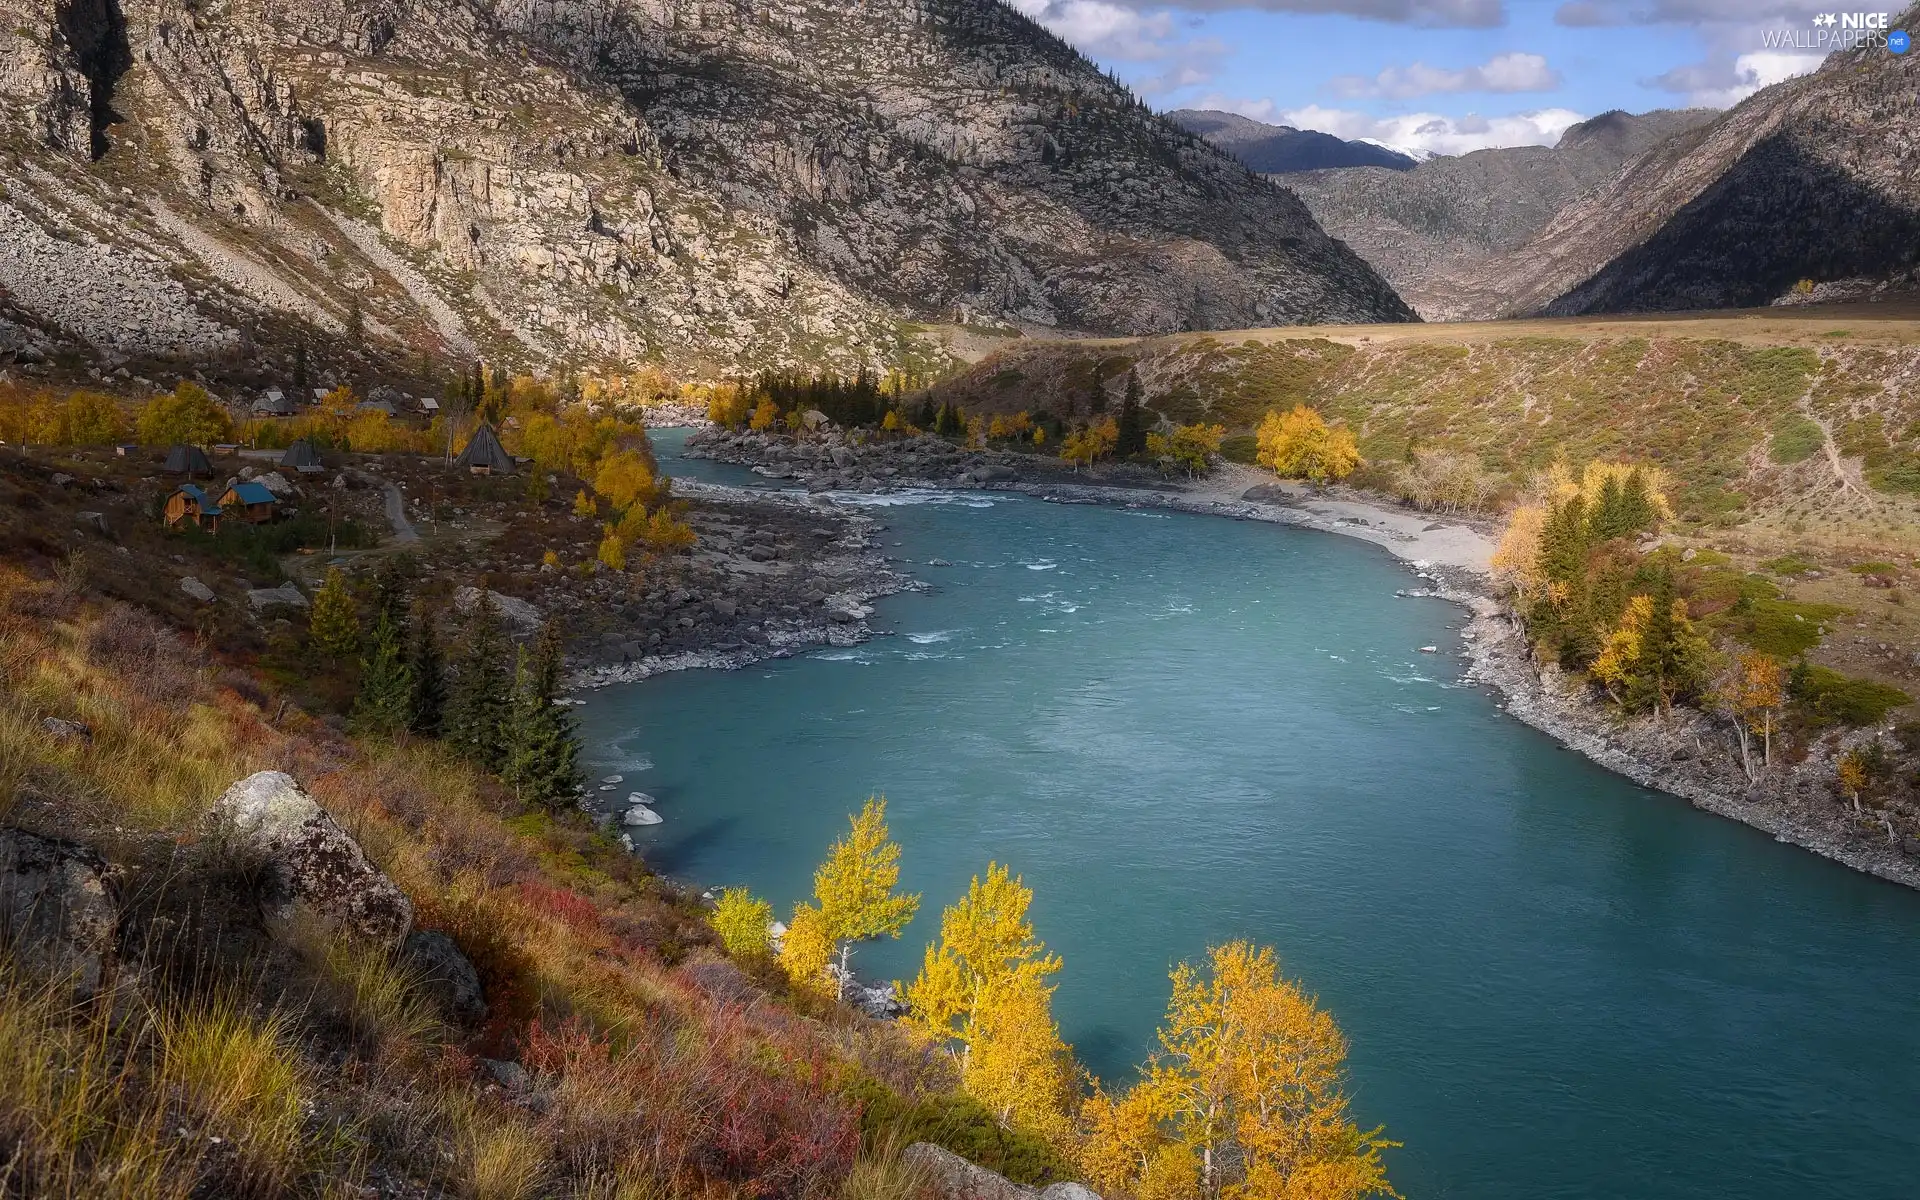 River, autumn, trees, viewes, Plants, Mountains